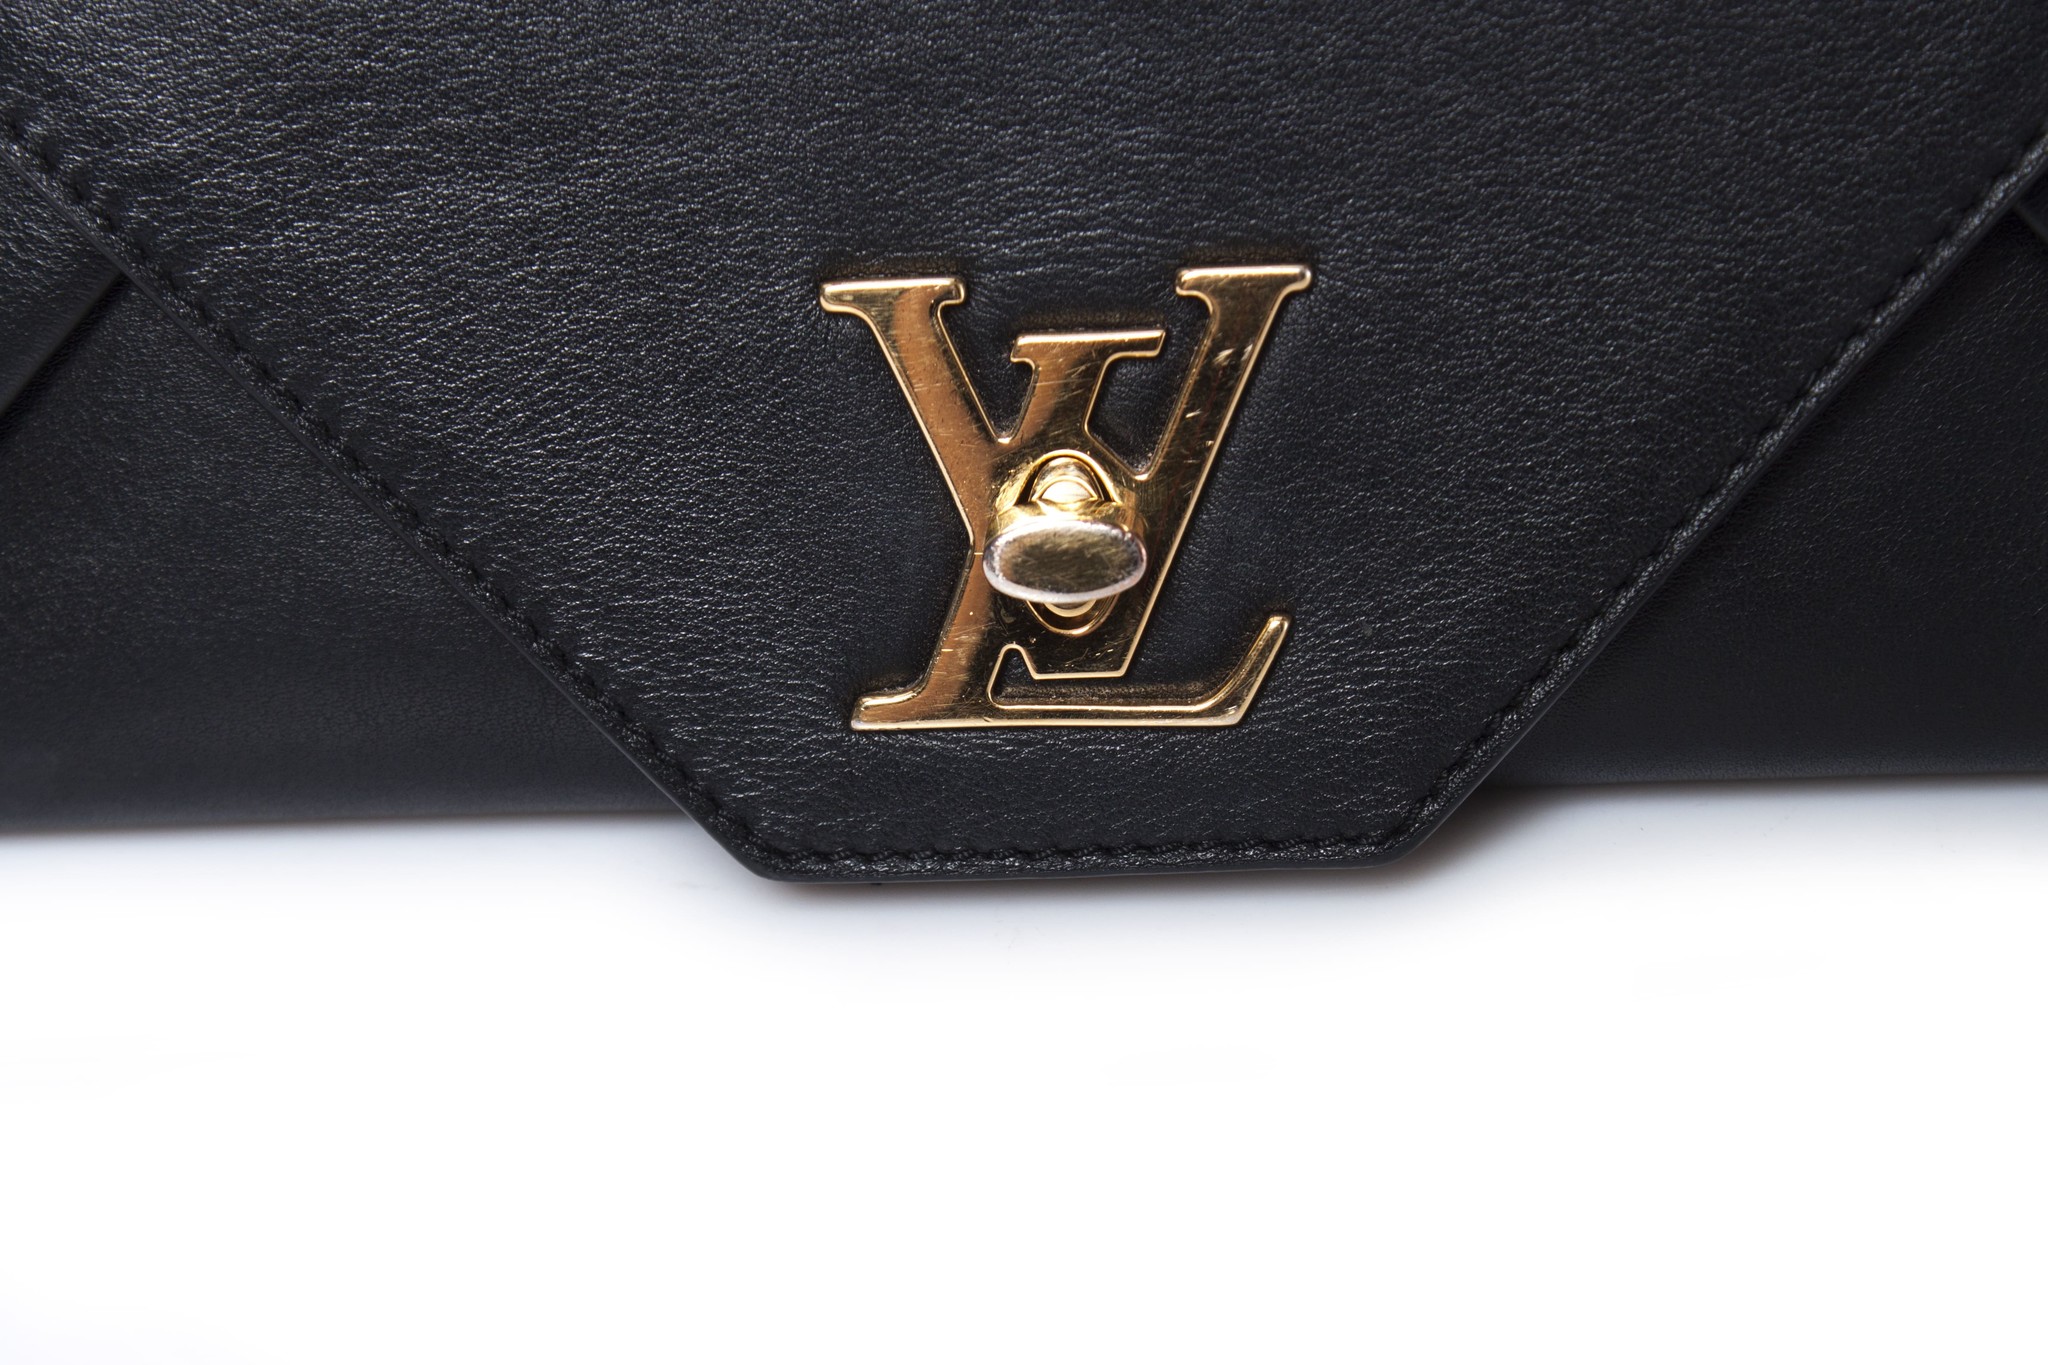 Authentic brand new LV love note black